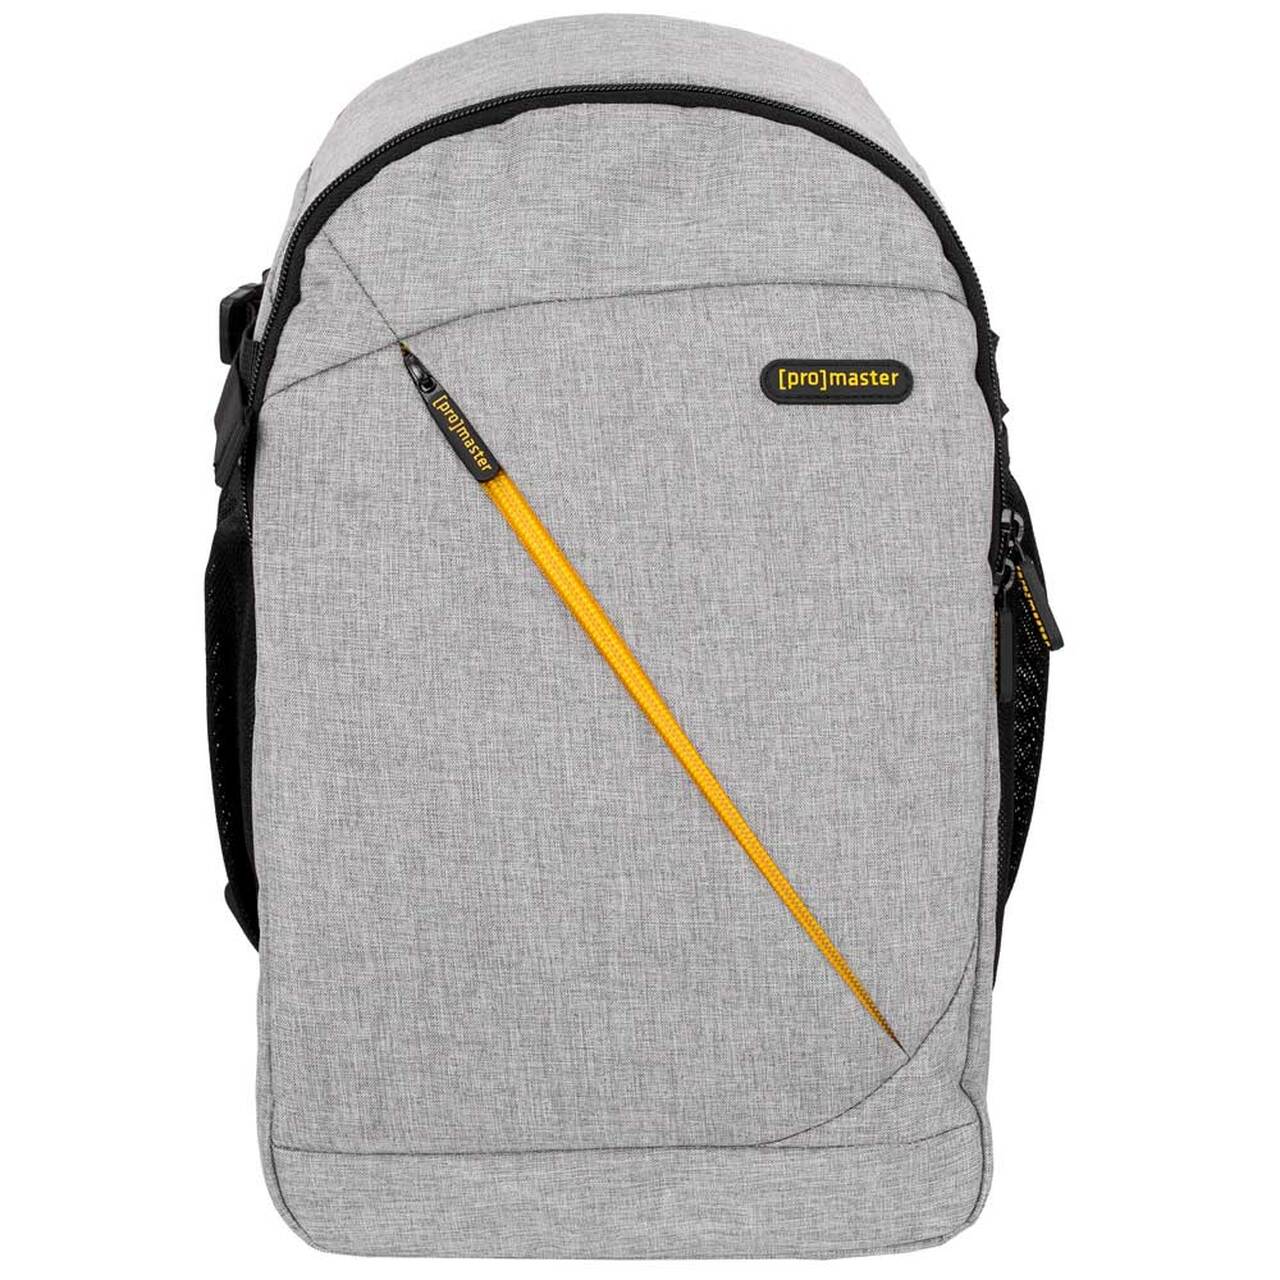 Promaster 7342 Impulse Backpack Small  - Grey